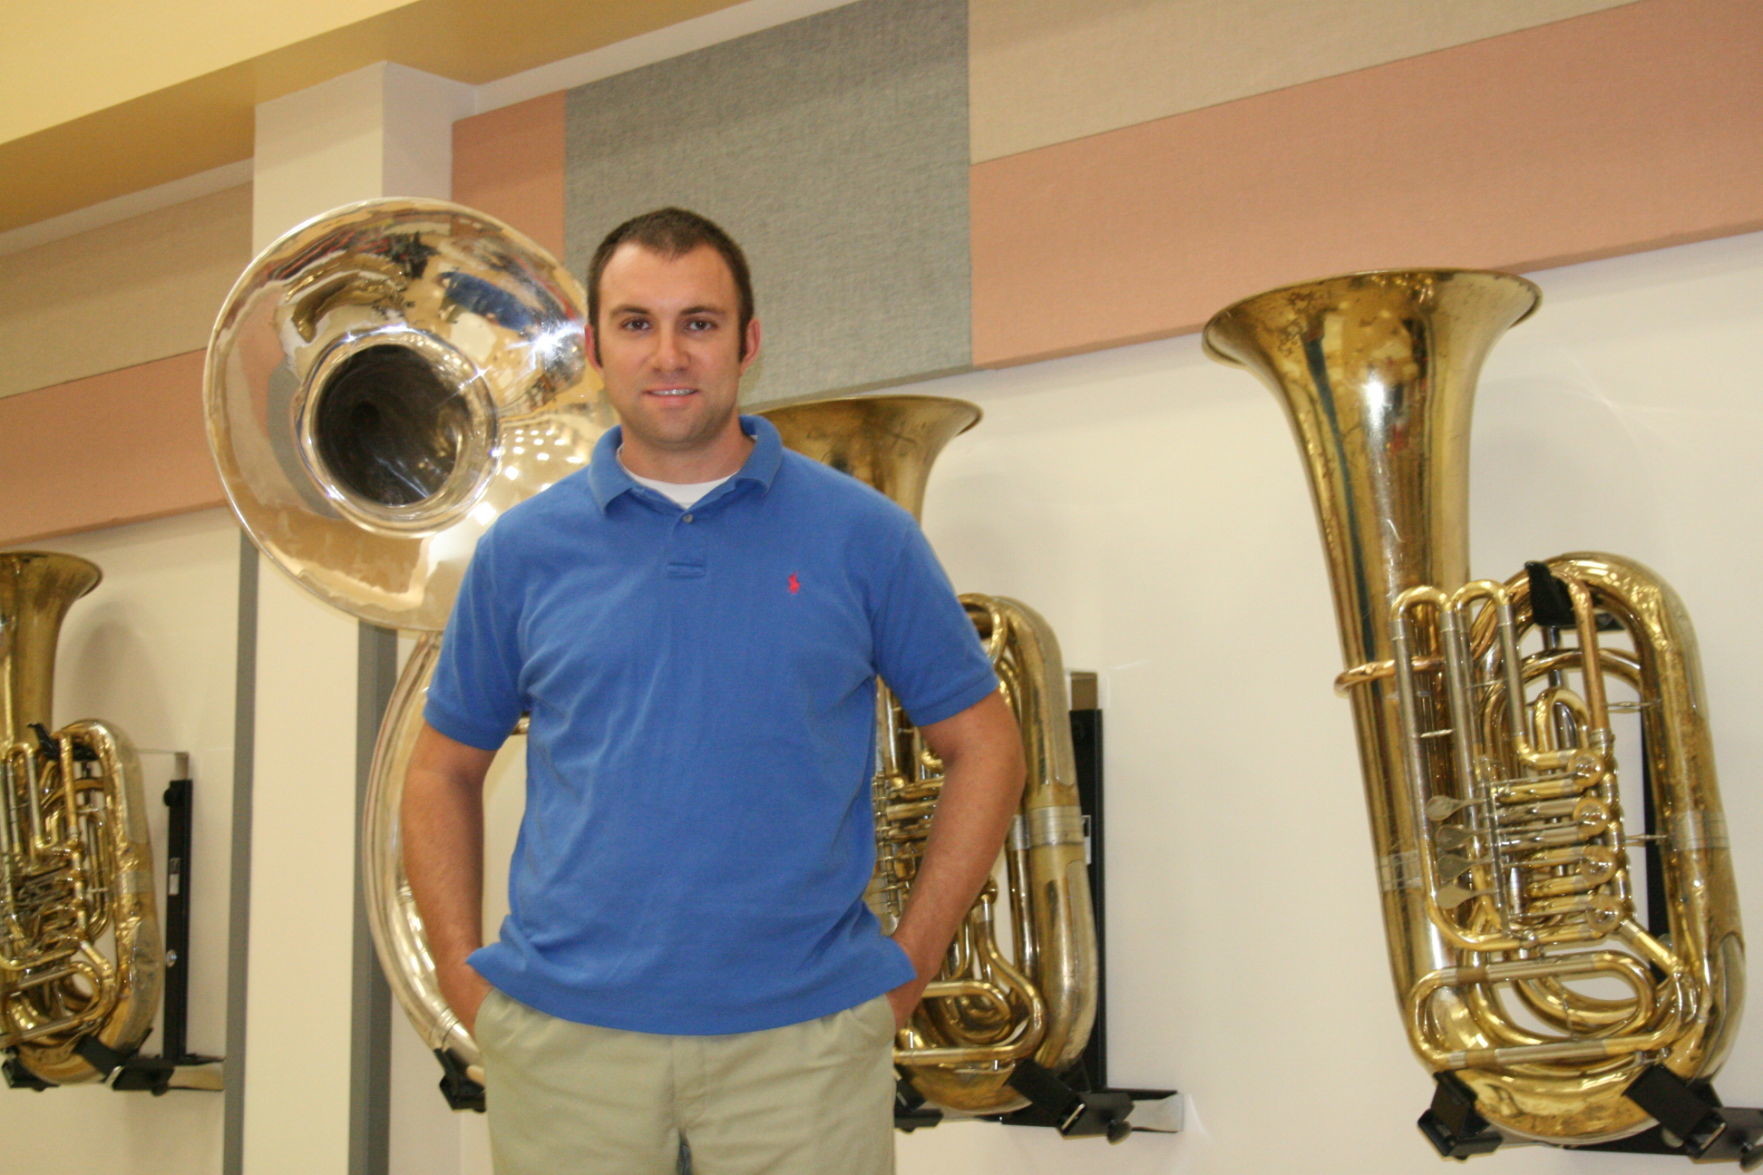 GHS band director Raymond Parker poses amid a brassy backdrop of valves and bells. Although he dreams of one day taking the Apache Band back to state finals, he says it’s no big rush - and he and his young musicians are going to live the dream one marching step at a time.